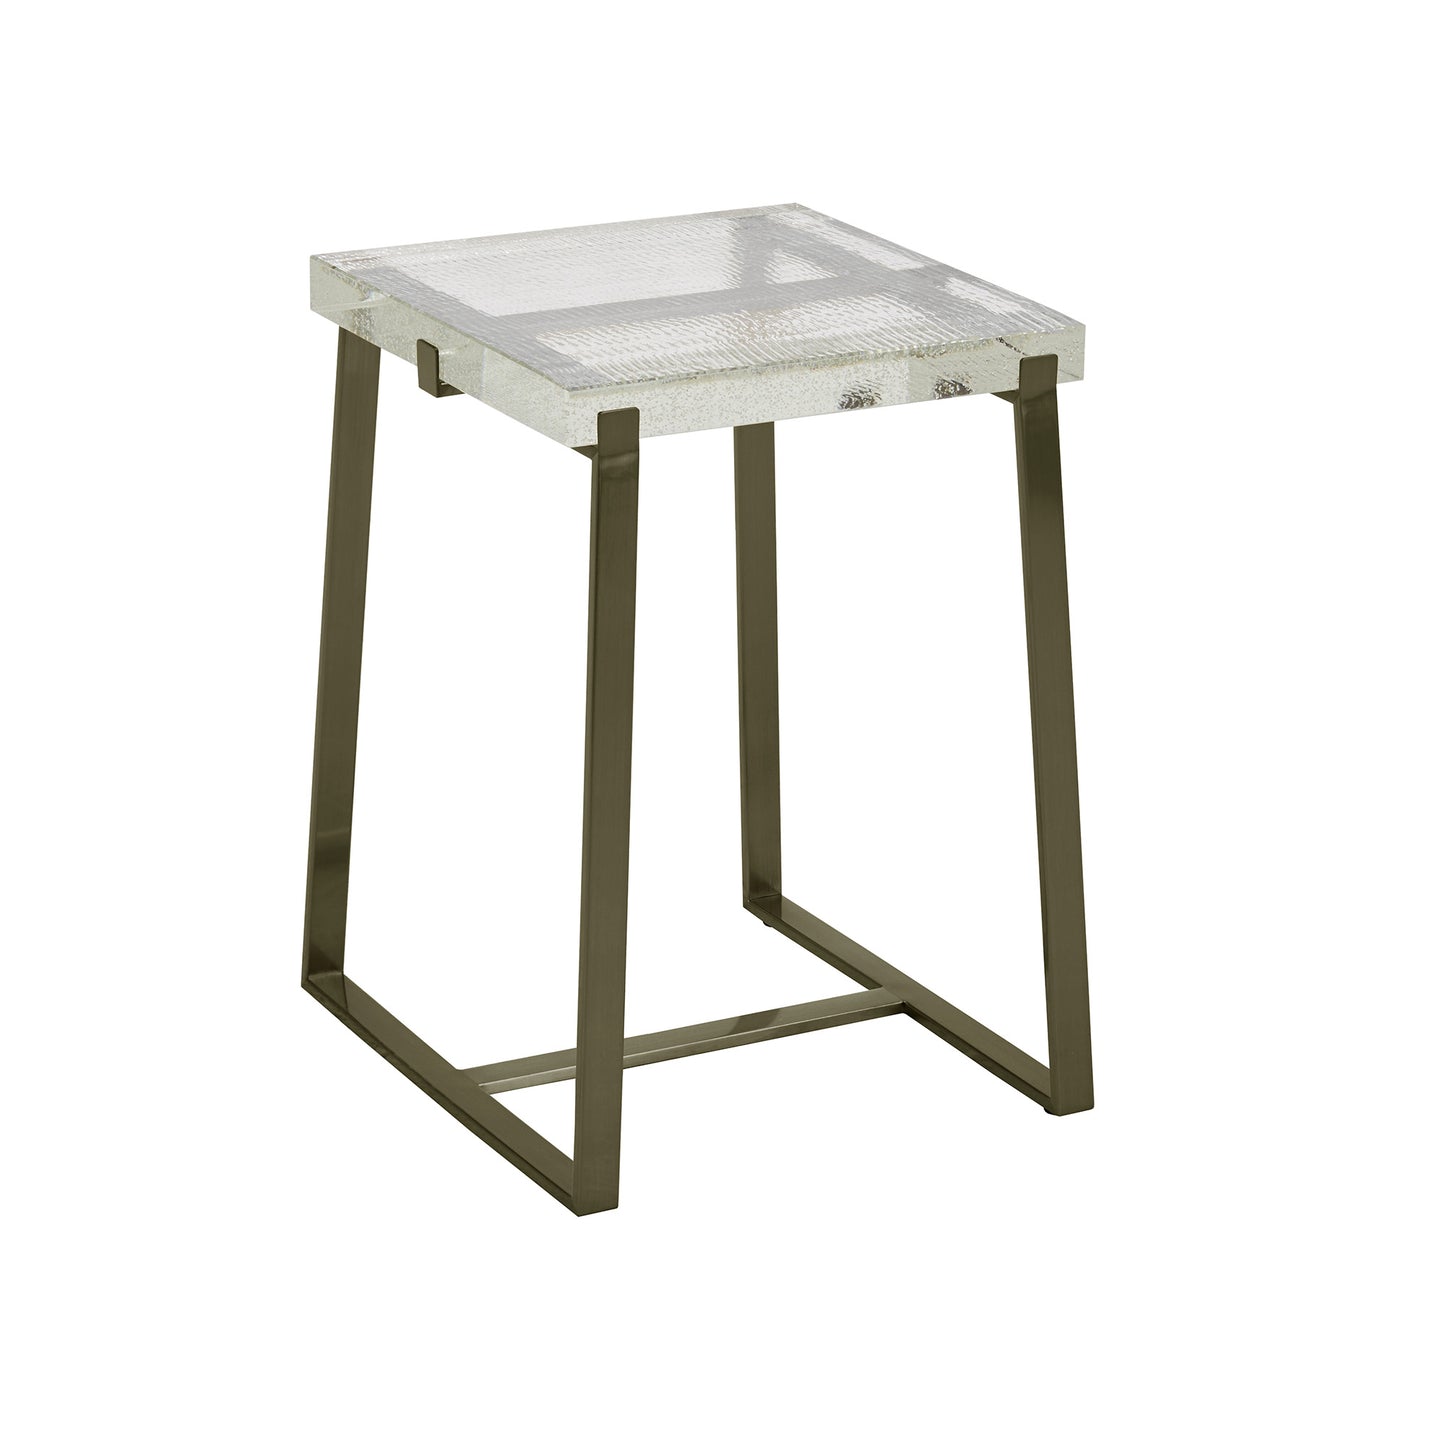 Stainless Steel Glass Top Table - Iron Grey Finish, Square End Table